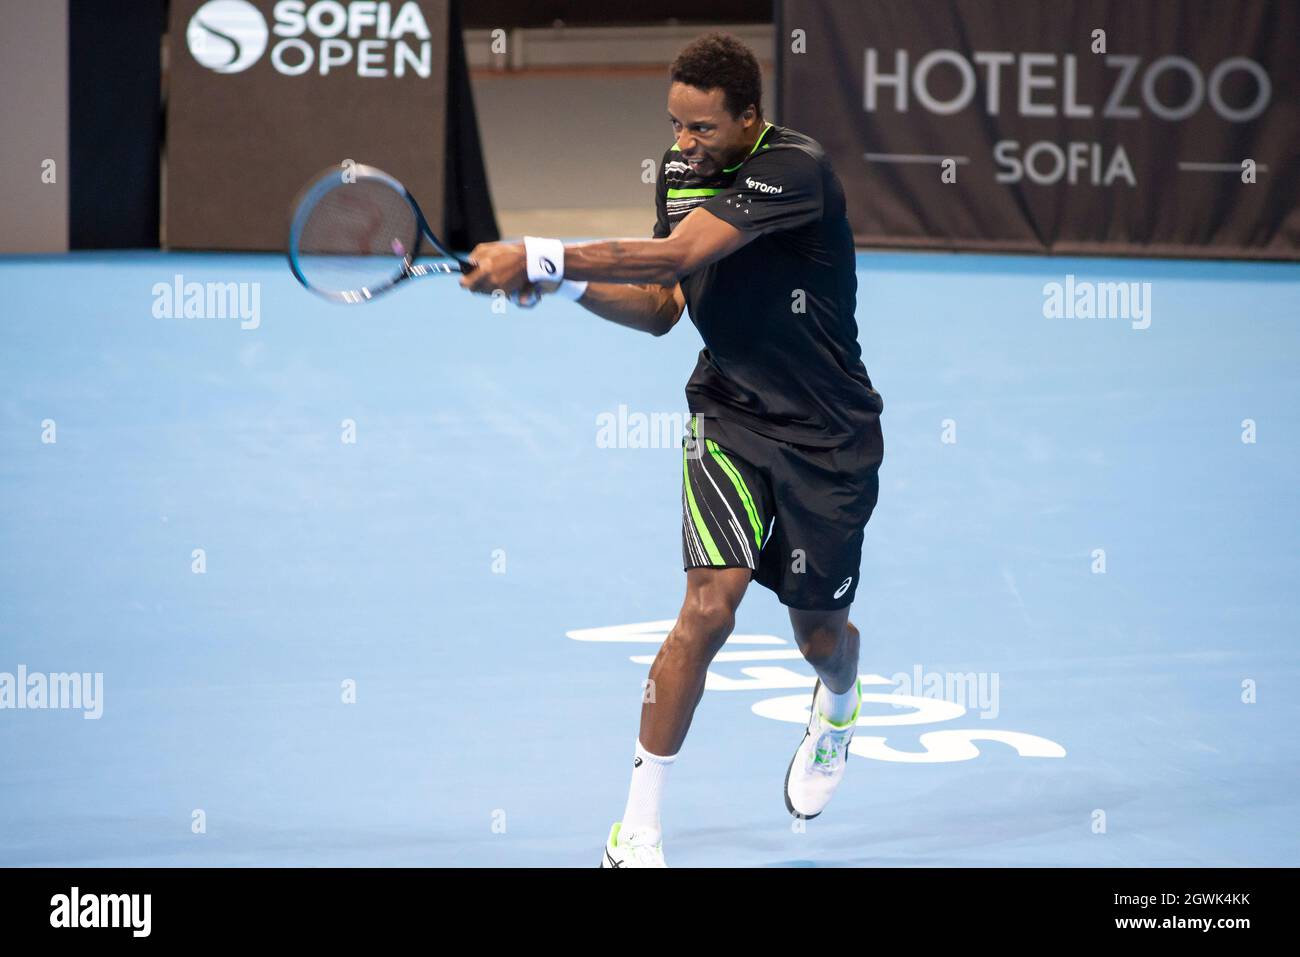 Sofia, Bulgaria. 03 October 2021. Gael Monfils of France in action against  Jannik Sinner of Italy during the men's singles final of the Sofia Open 2021 ATP 250 indoor tennis tournament on hard courts. Credit: Ognyan Yosifov/Alamy Live News Stock Photo